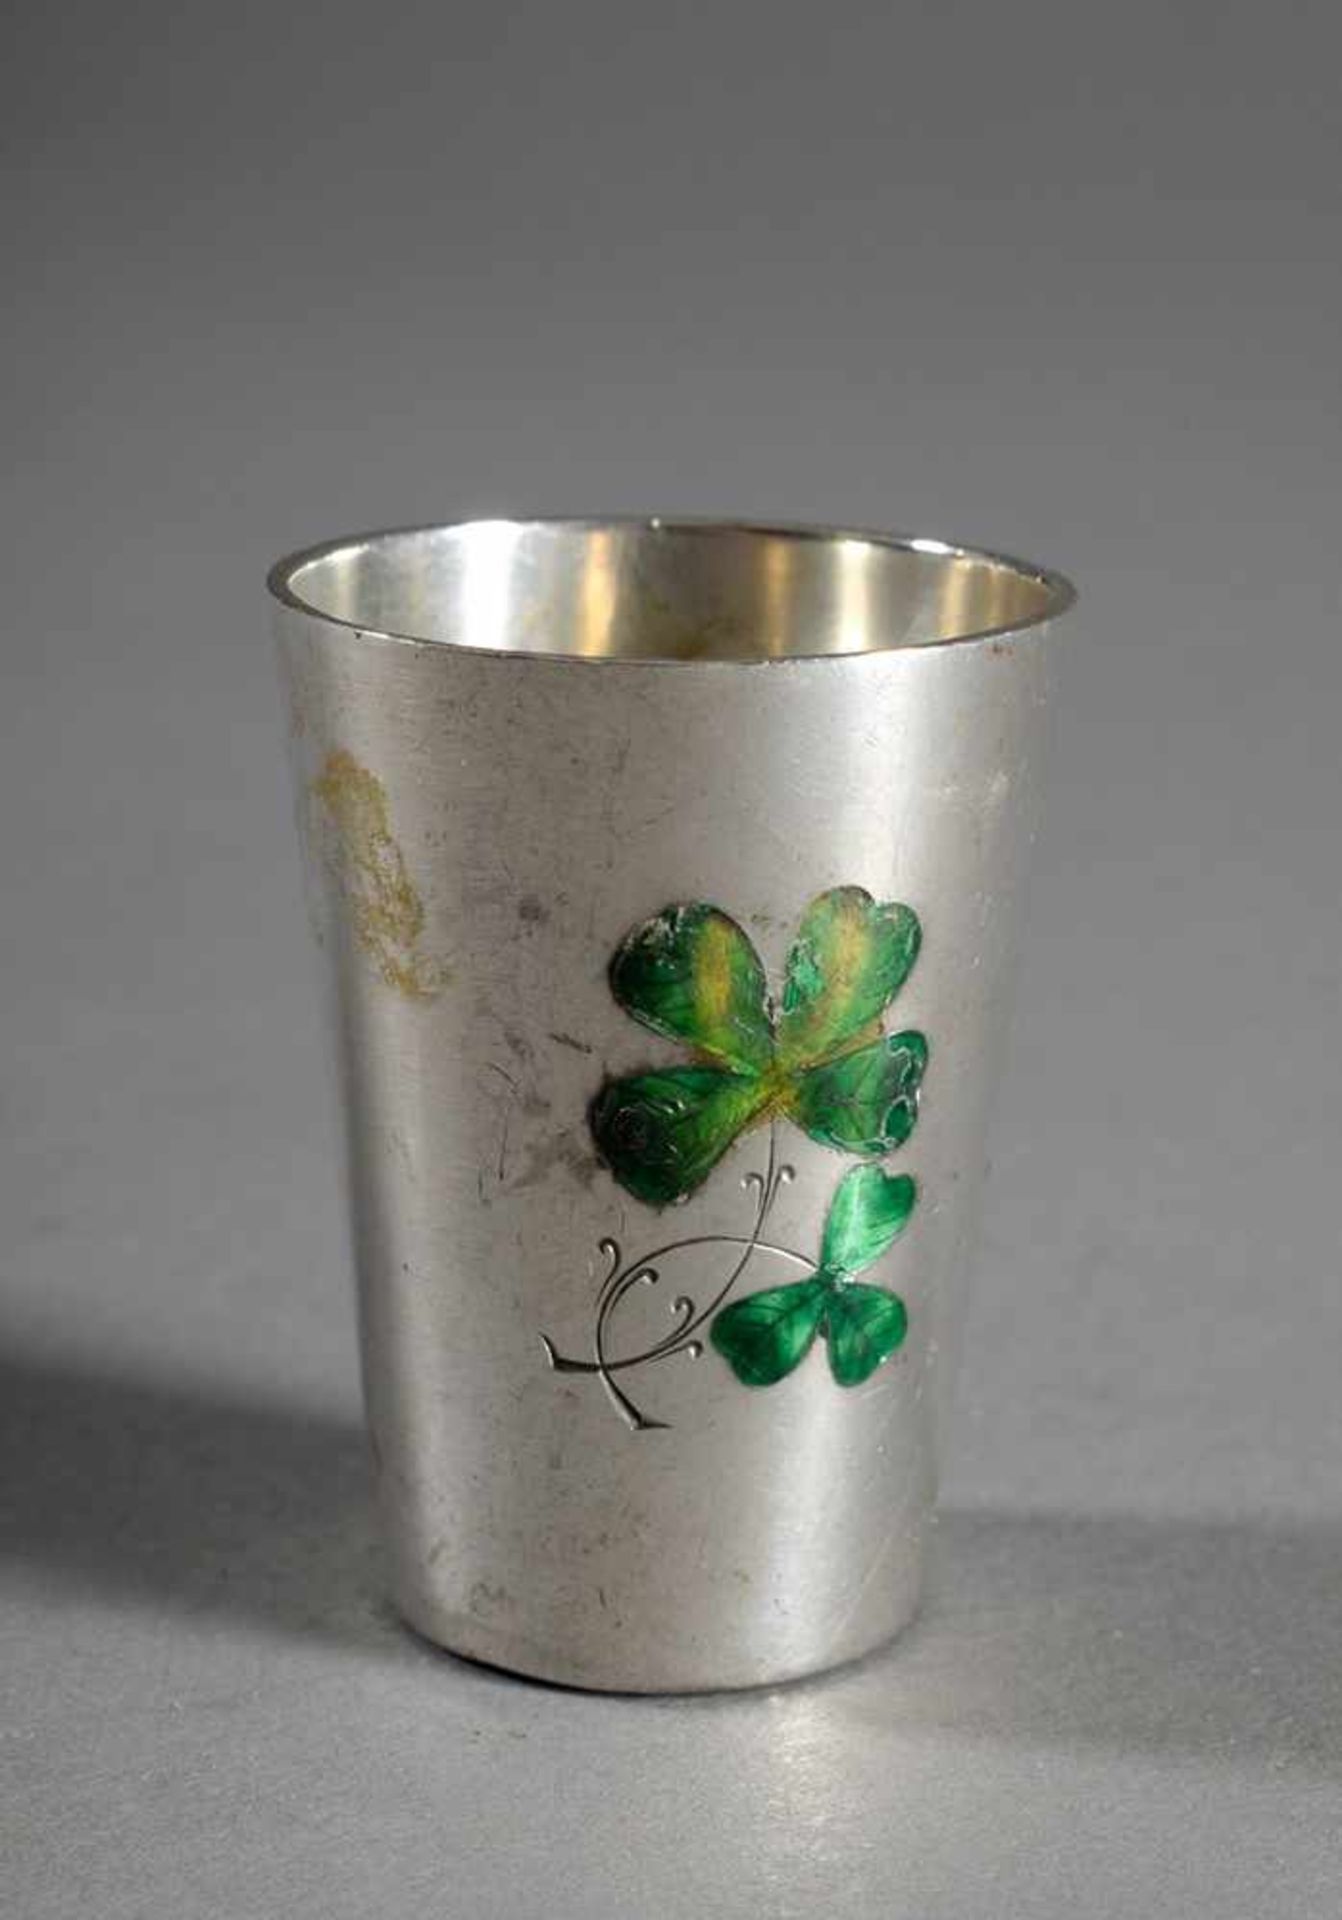 Small "lucky cup" with enamel cloverleaf, silver 800, 27g, h. 4,5cm, small defects